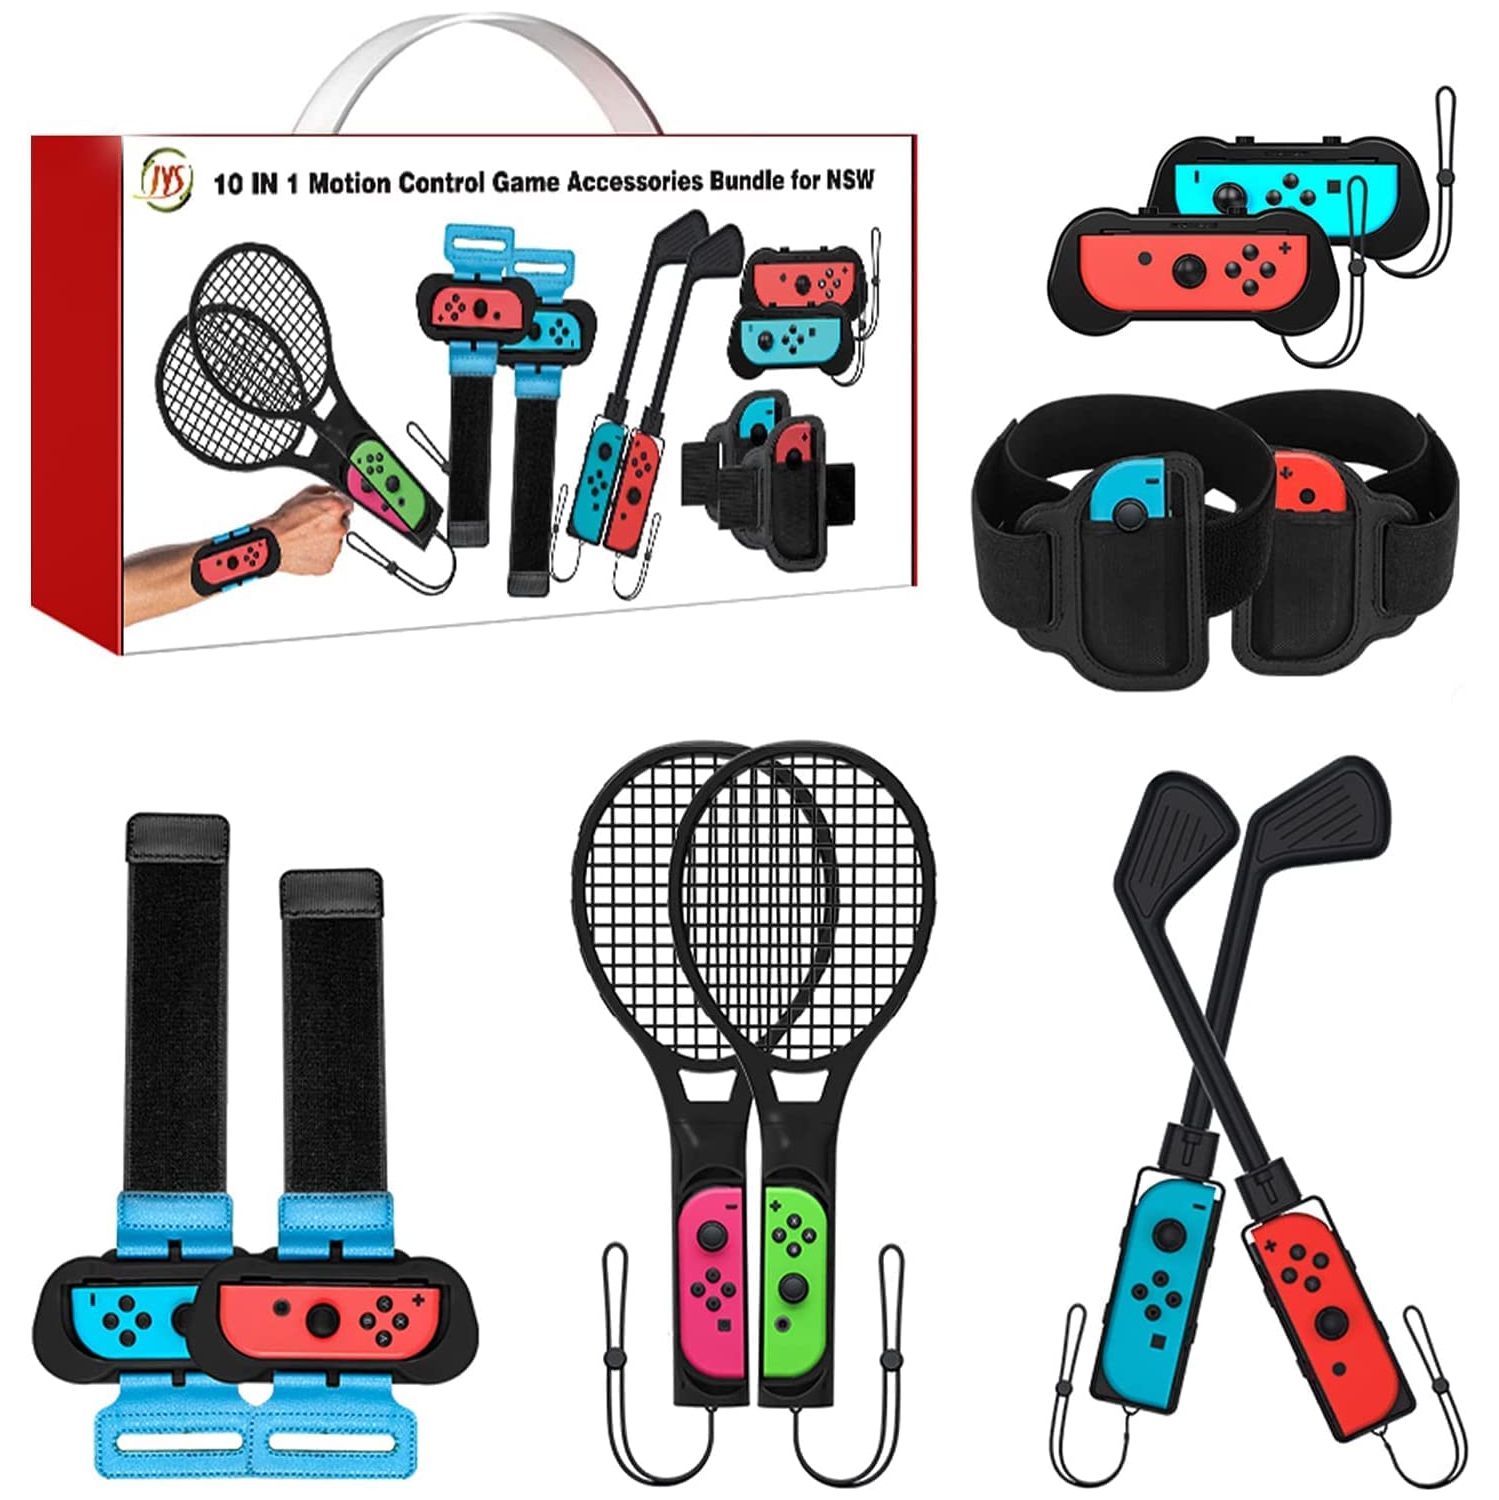 2022 Switch Sports Accessories Bundle - 10 in 1 Family Accessories Kit for Nintendo Switch & OLED Games:Controller